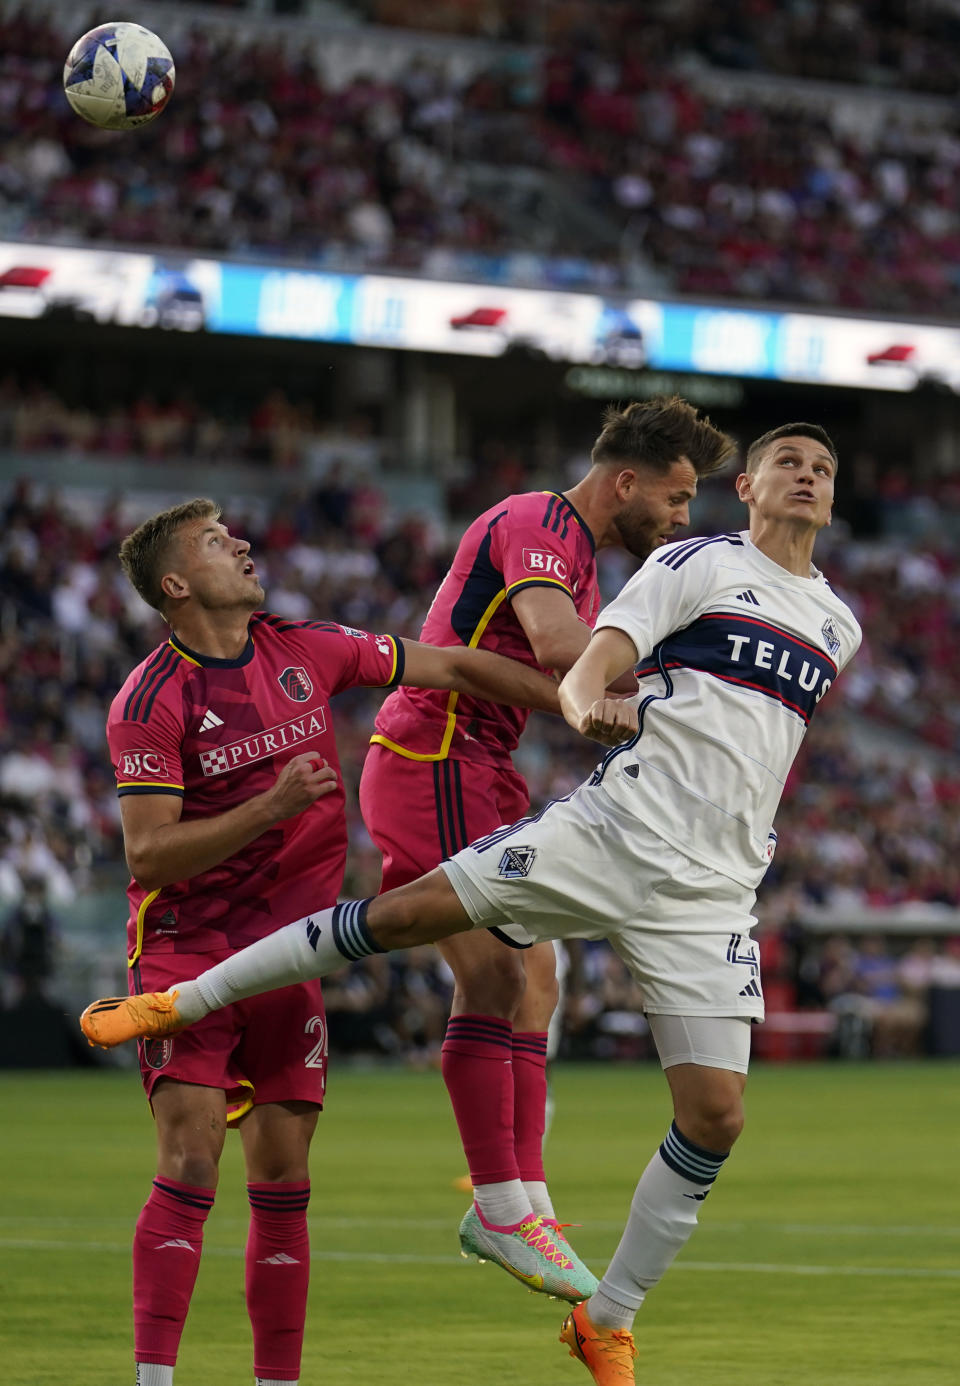 Vancouver Whitecaps' Ranko Veselinovic, right, heads the ball as St. Louis City's Eduard Lowen and Lucas Bartlett, left, defend during the first half of an MLS soccer match Saturday, May 27, 2023, in St. Louis. (AP Photo/Jeff Roberson)